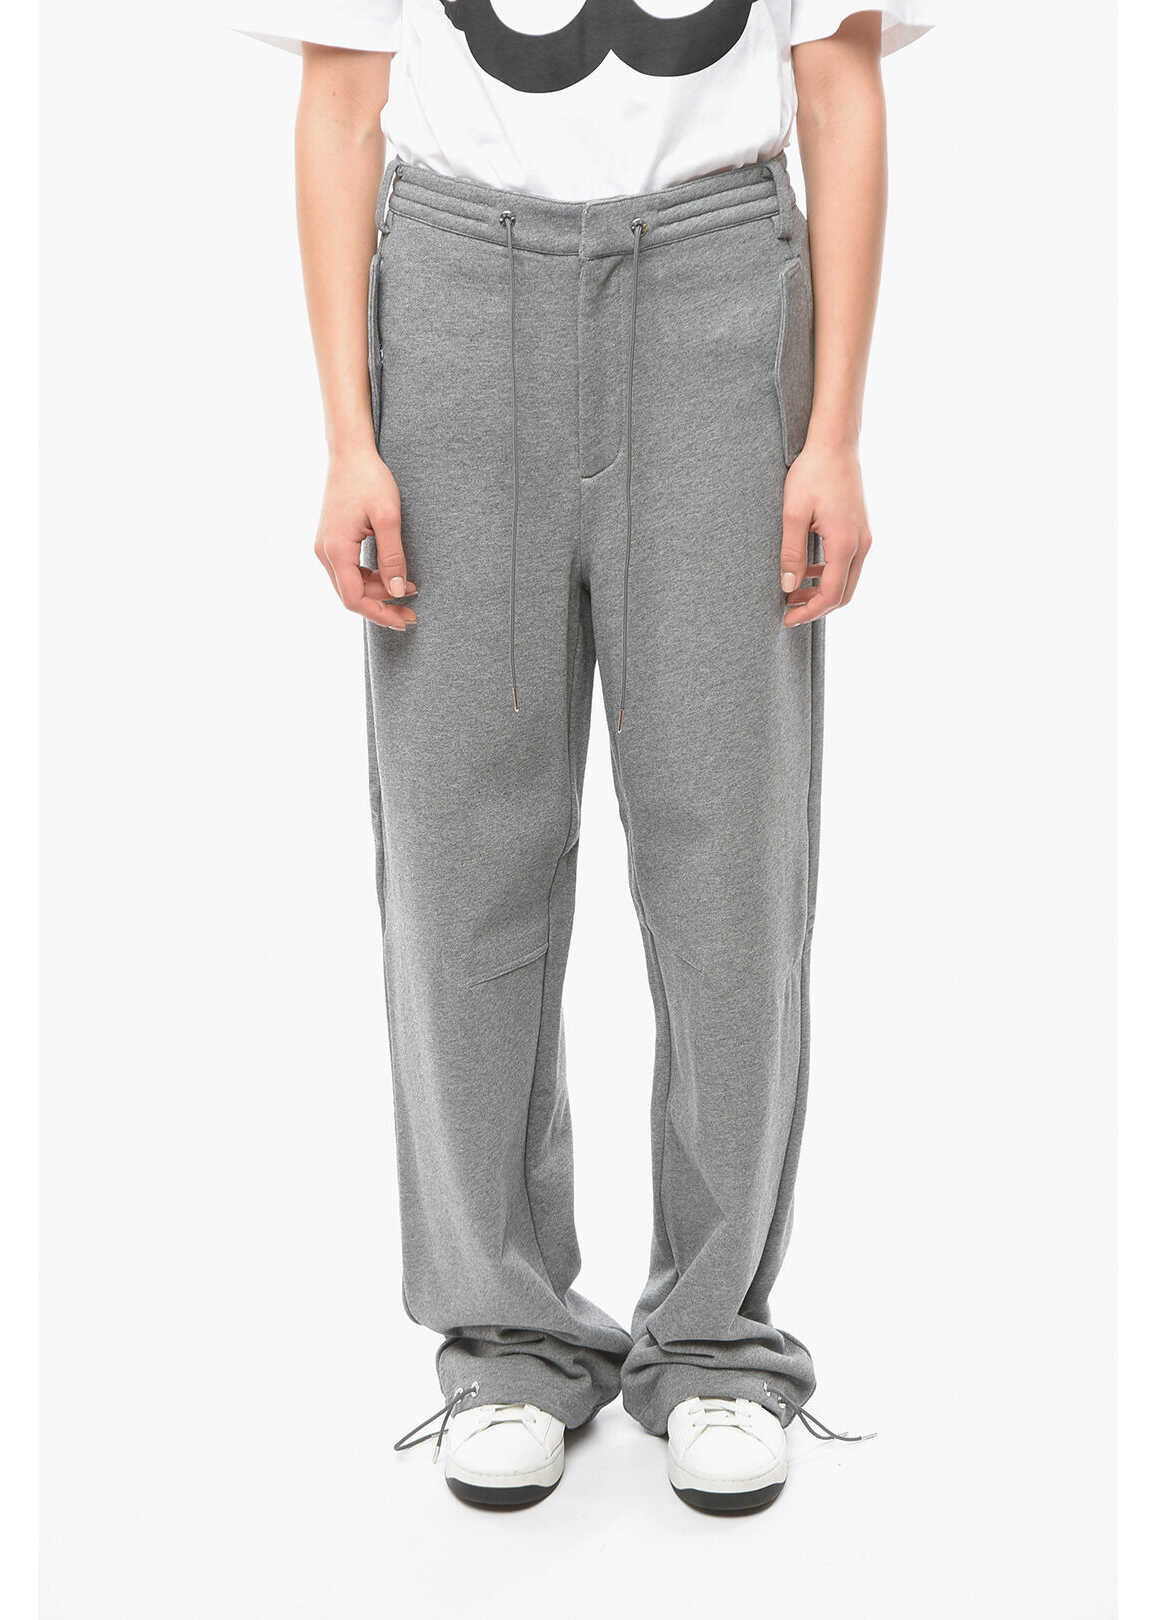 DION LEE 3 Pockets Terry Sweatpants With Belt Loops Gray